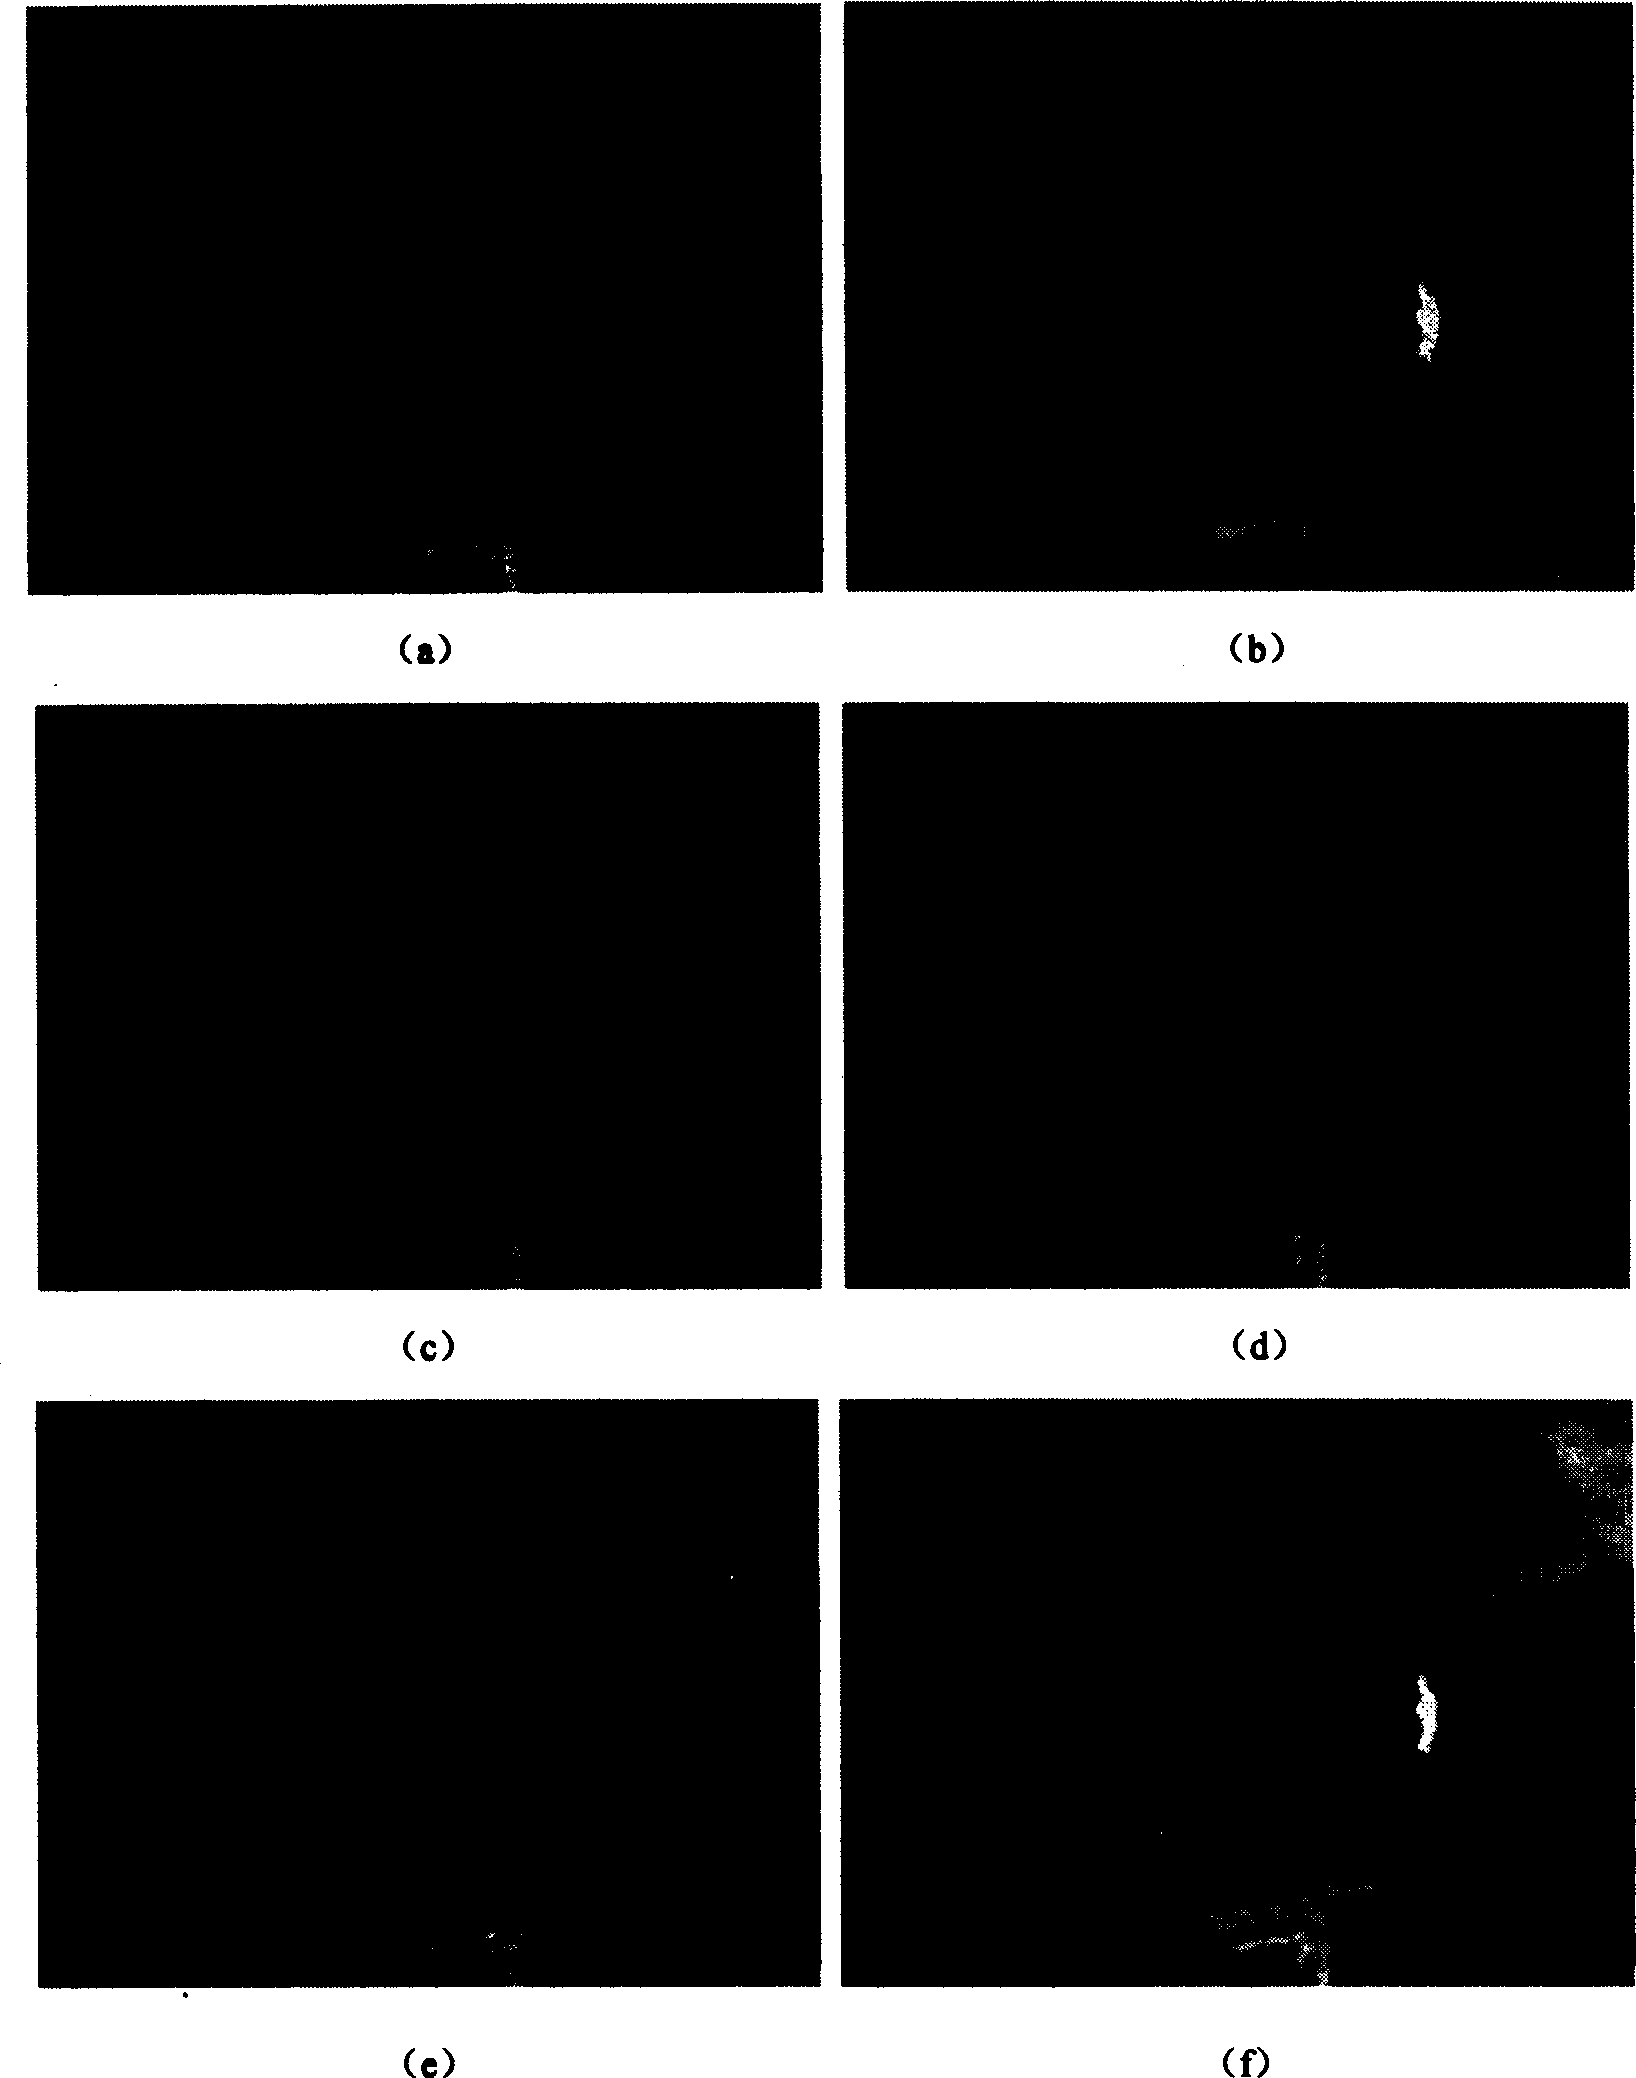 Infrared and visible light image merging method